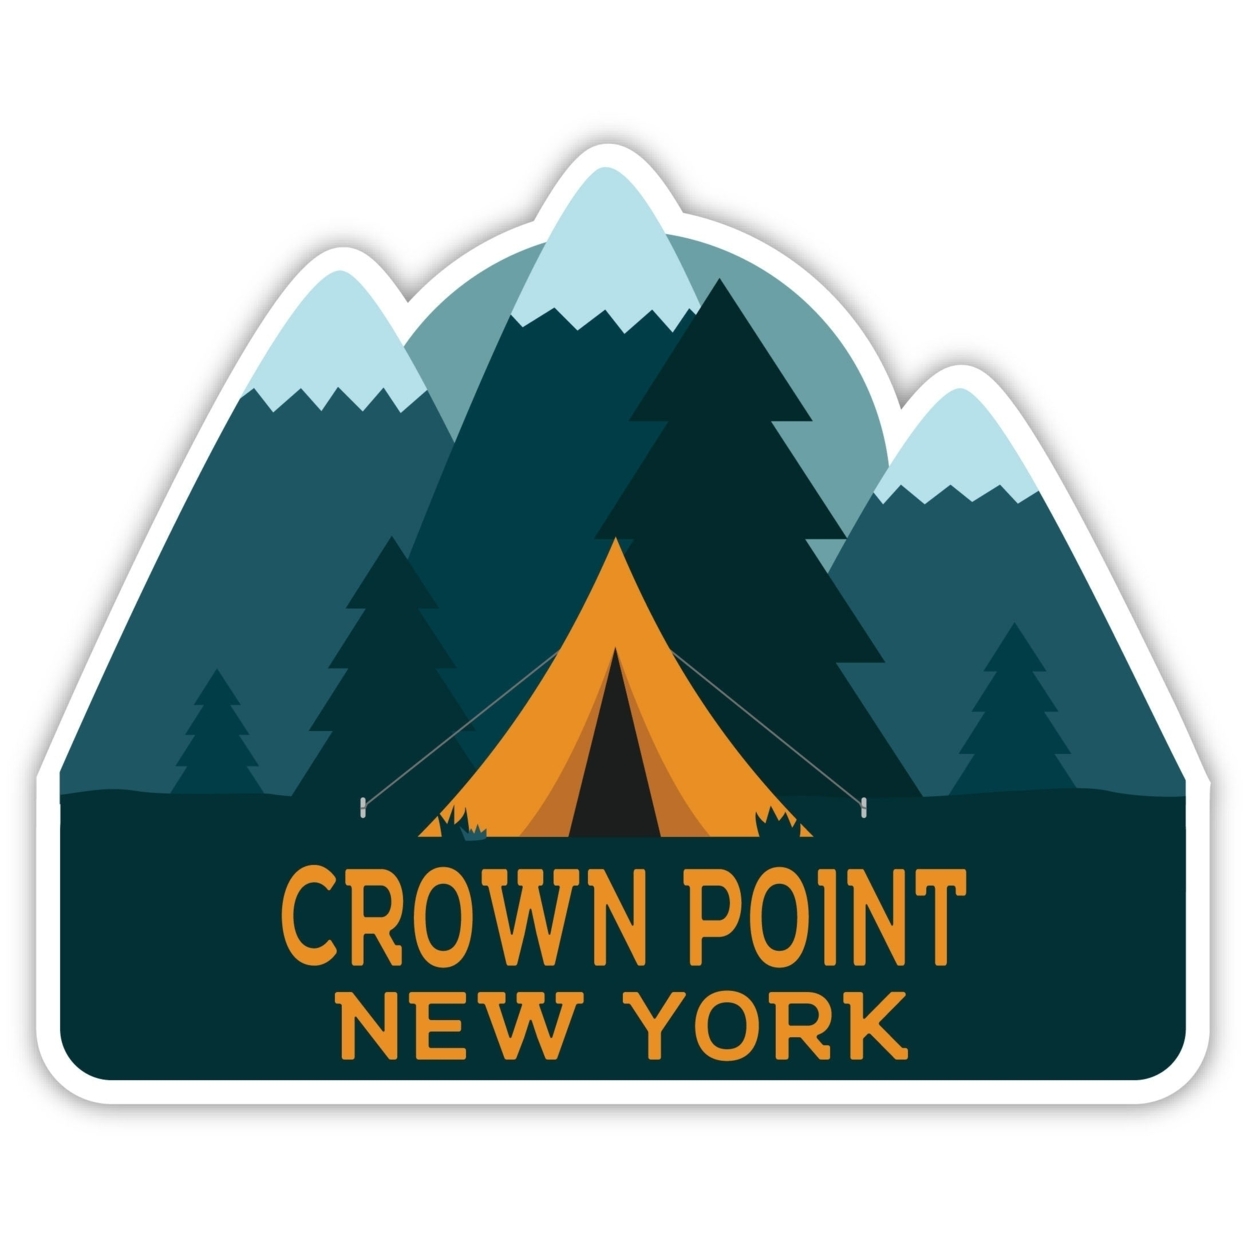 Crown Point New York Souvenir Decorative Stickers (Choose Theme And Size) - 4-Pack, 12-Inch, Tent